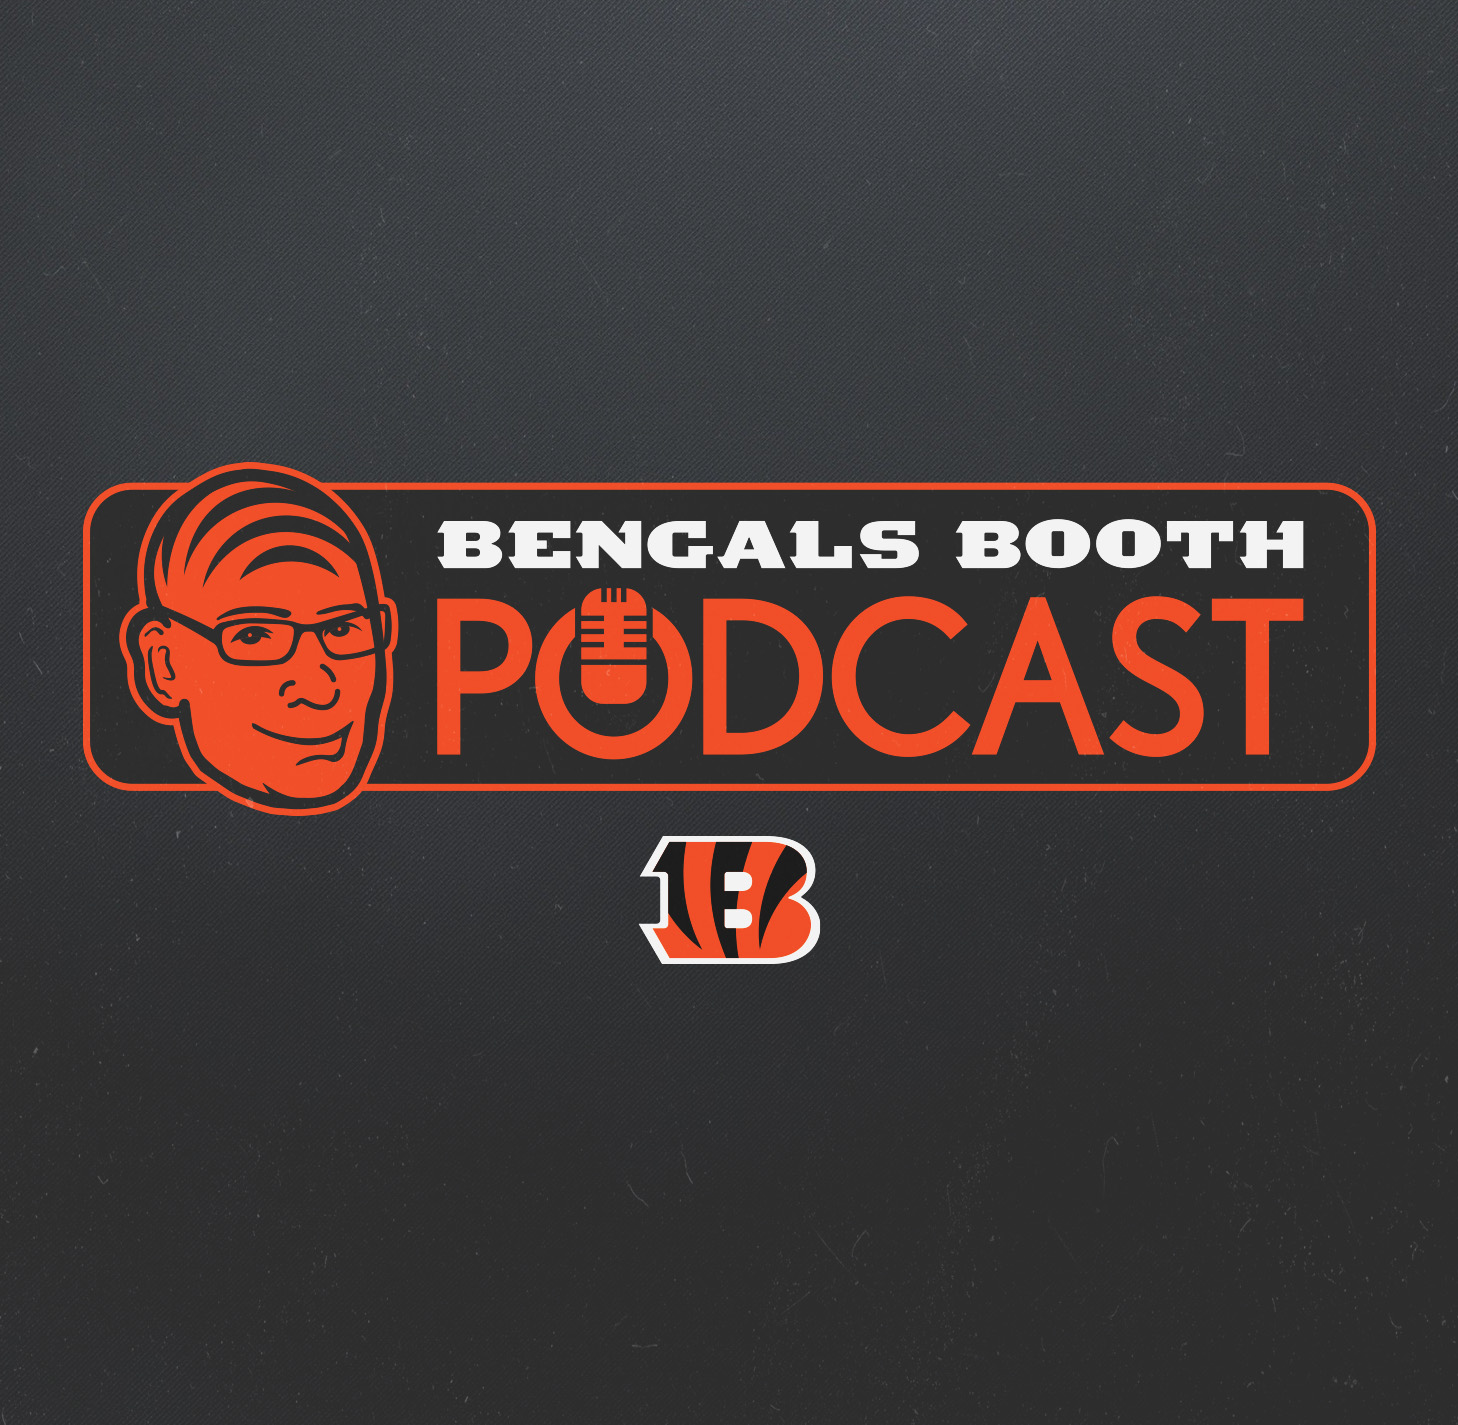 Bengals Booth Podcast: Move On Up